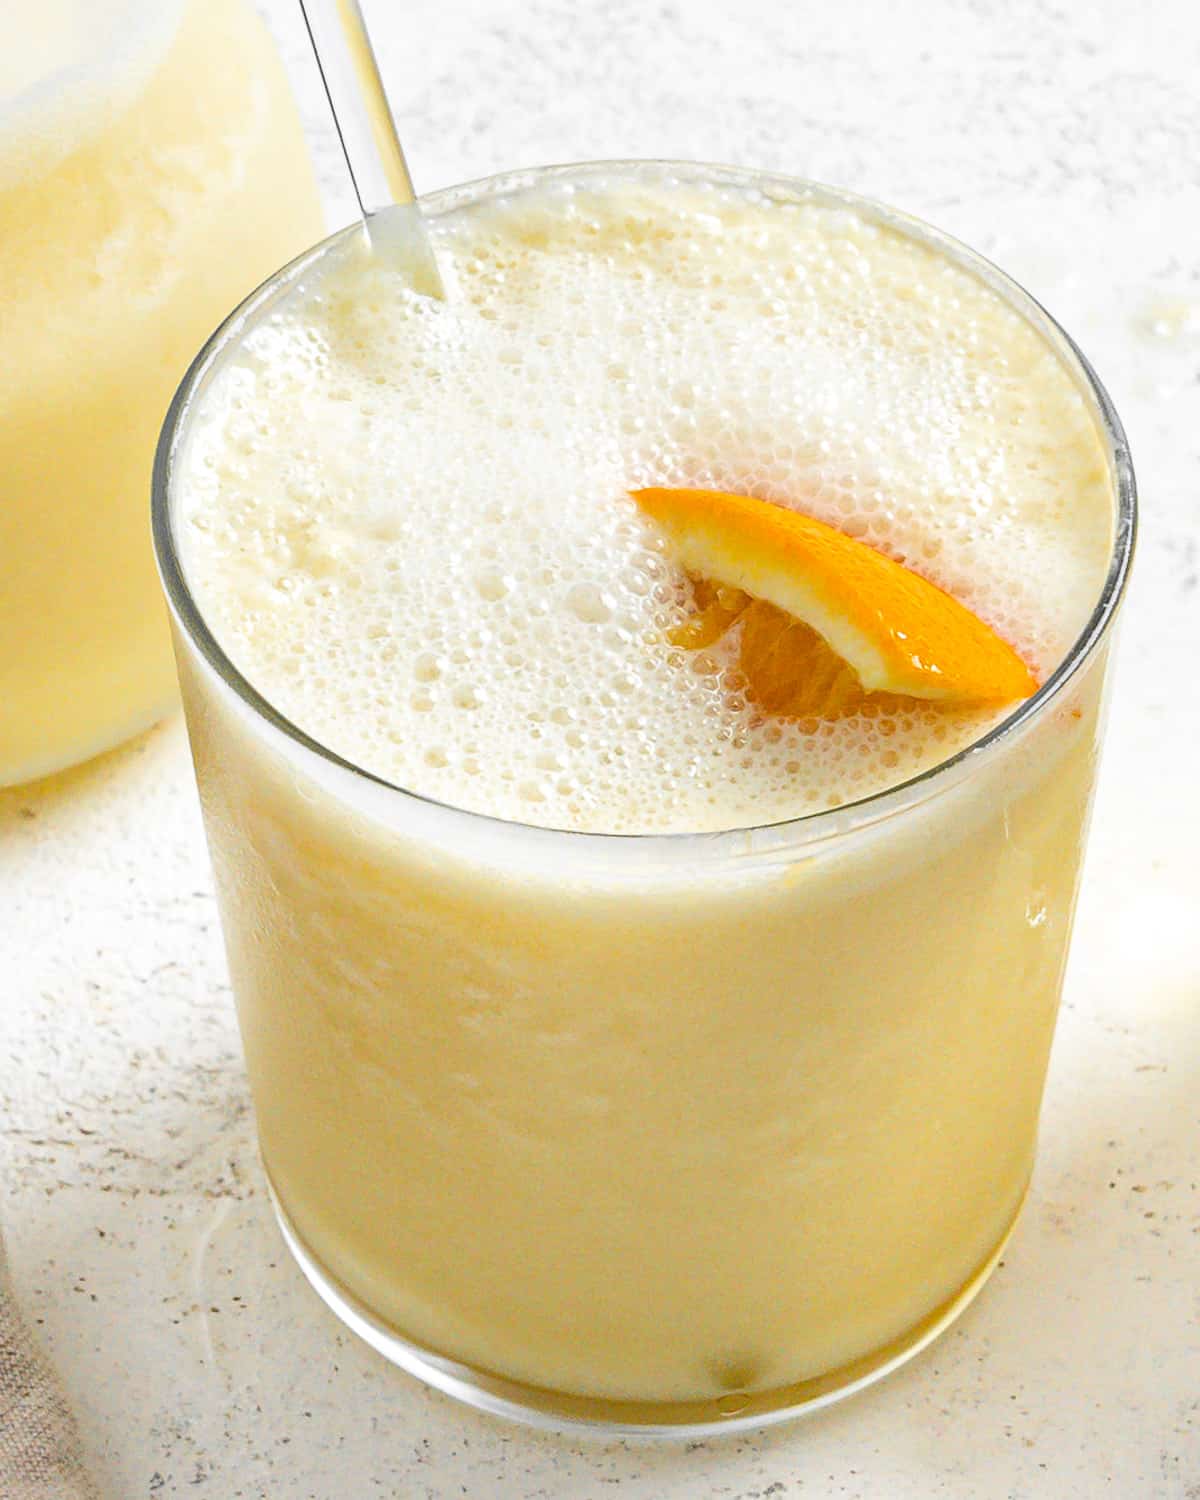 completed Easy Orange Julius Smoothies in glass cups with a pitcher in the background